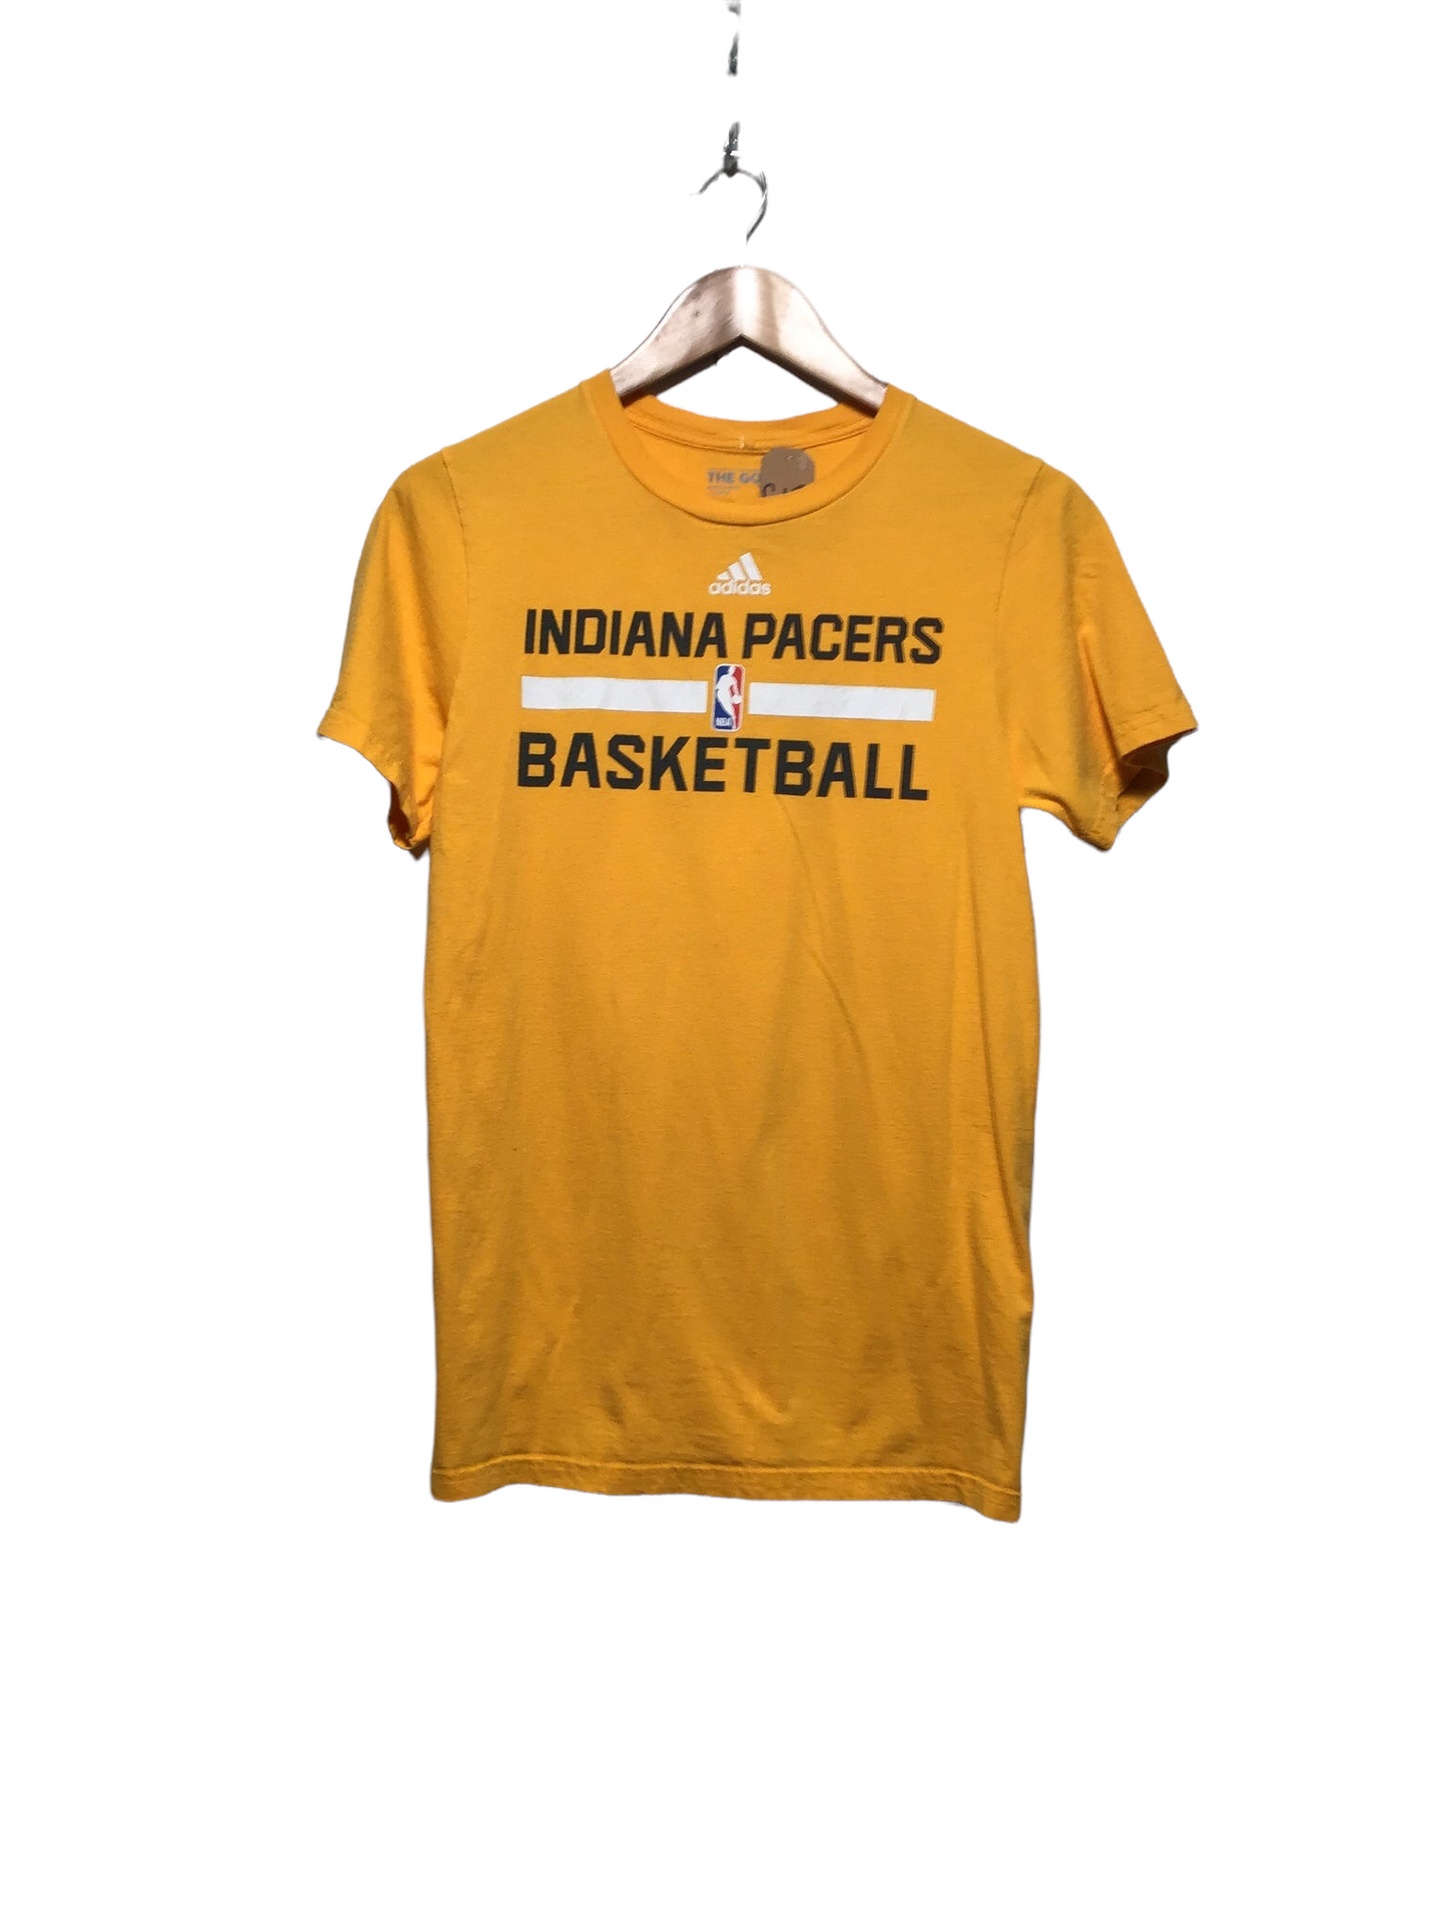 Adidas Indiana Pacers Tee (Size S)